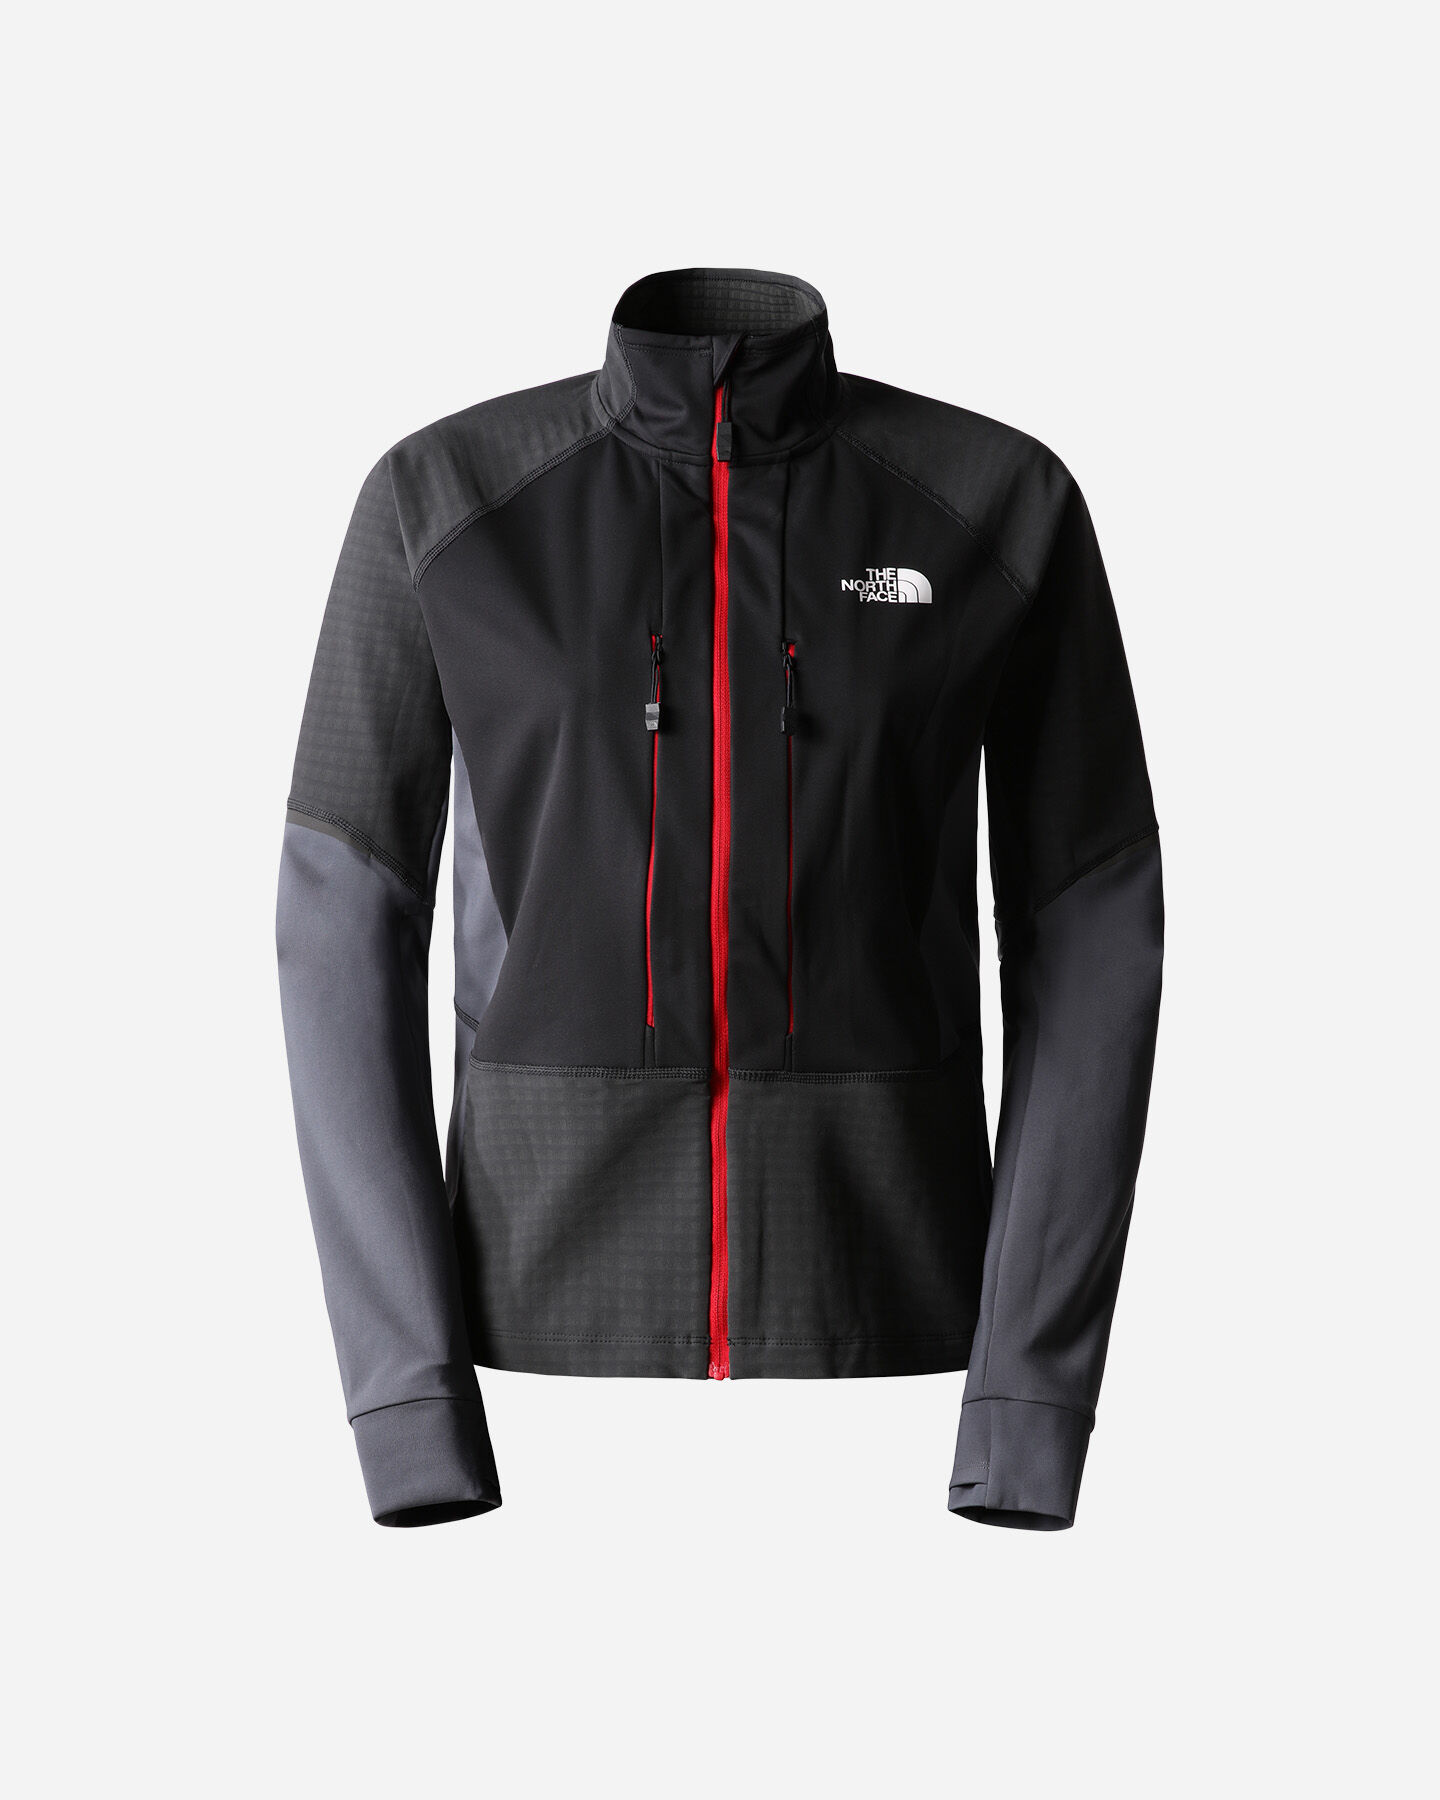  Pile THE NORTH FACE DAWN TURN SOFTSHELL W S5476184|95K|XS scatto 0